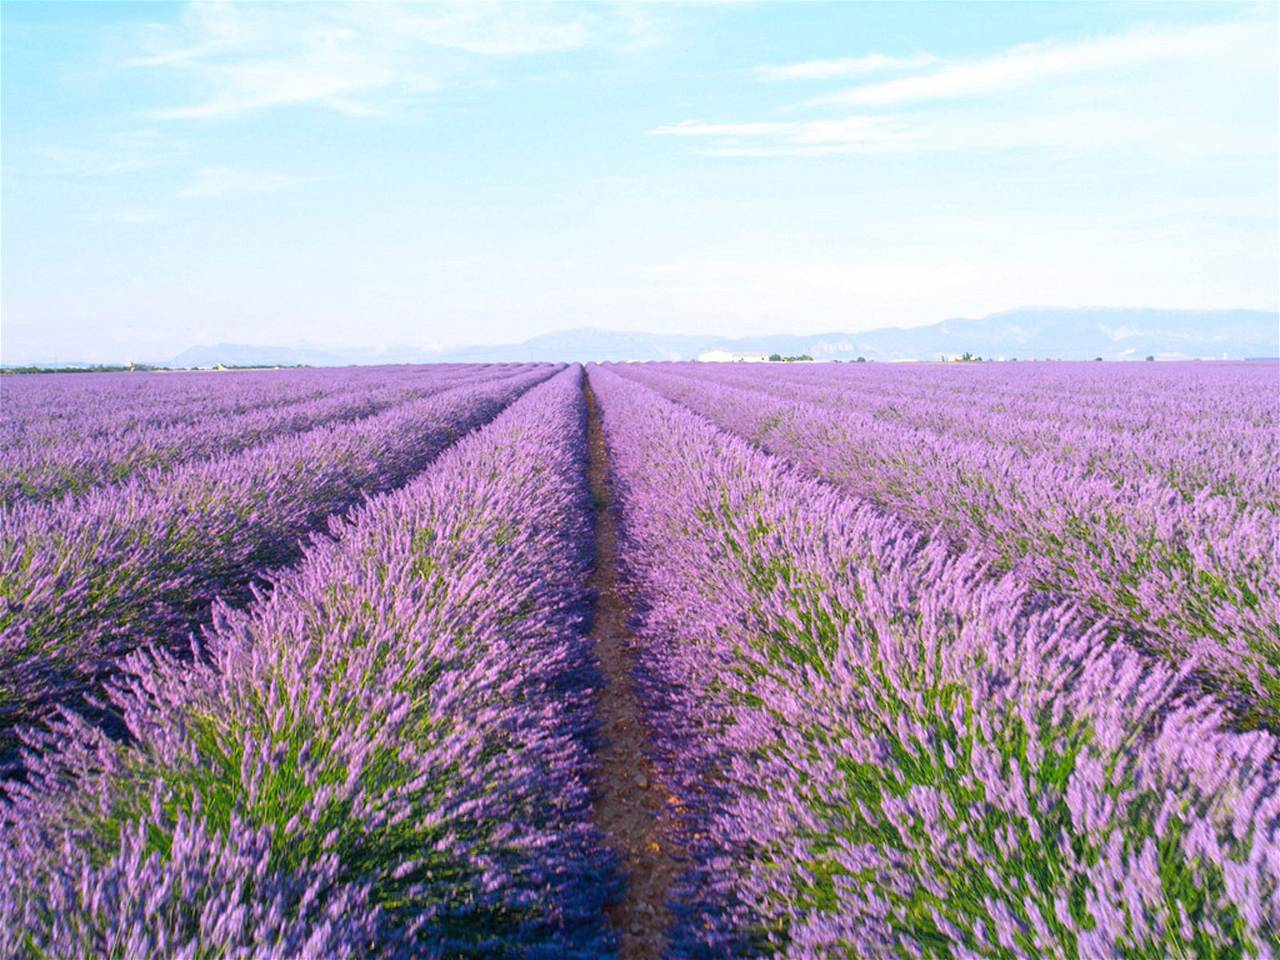 Lavender Cultivation Guide: Season, Seed Rate, Field Preparation, Transplanting, and Irrigation